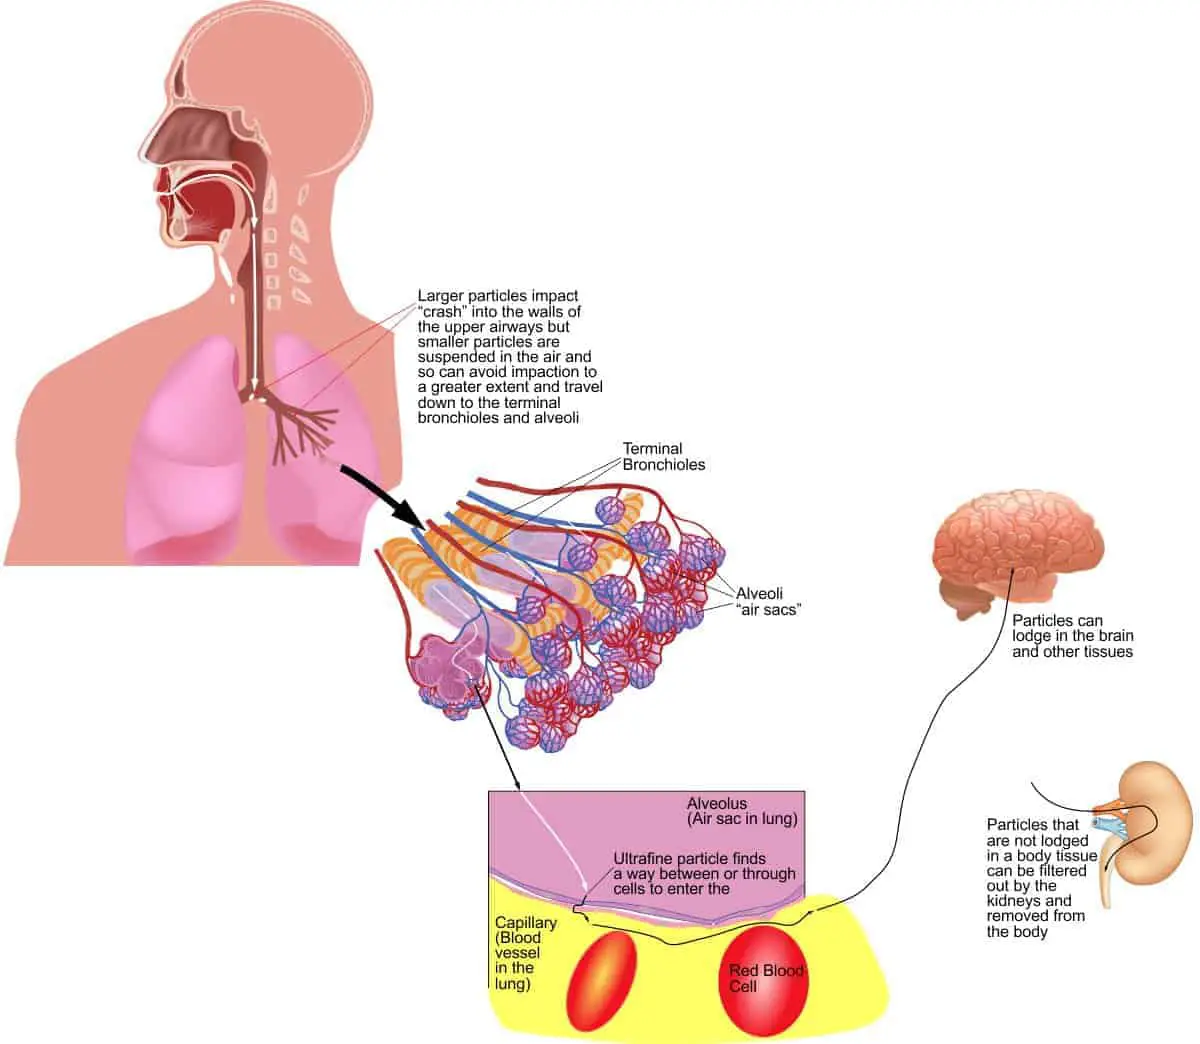 Mechanism by which ultrafine particles enter the alveoli and then are so small that they can slip through both the alveolar cells lining the alveoli and the endothelial cells lining the capillary and enter the bloodstream. Once they are in the bloodstream, they can travel to any organ or tissue in the body including the brain. 